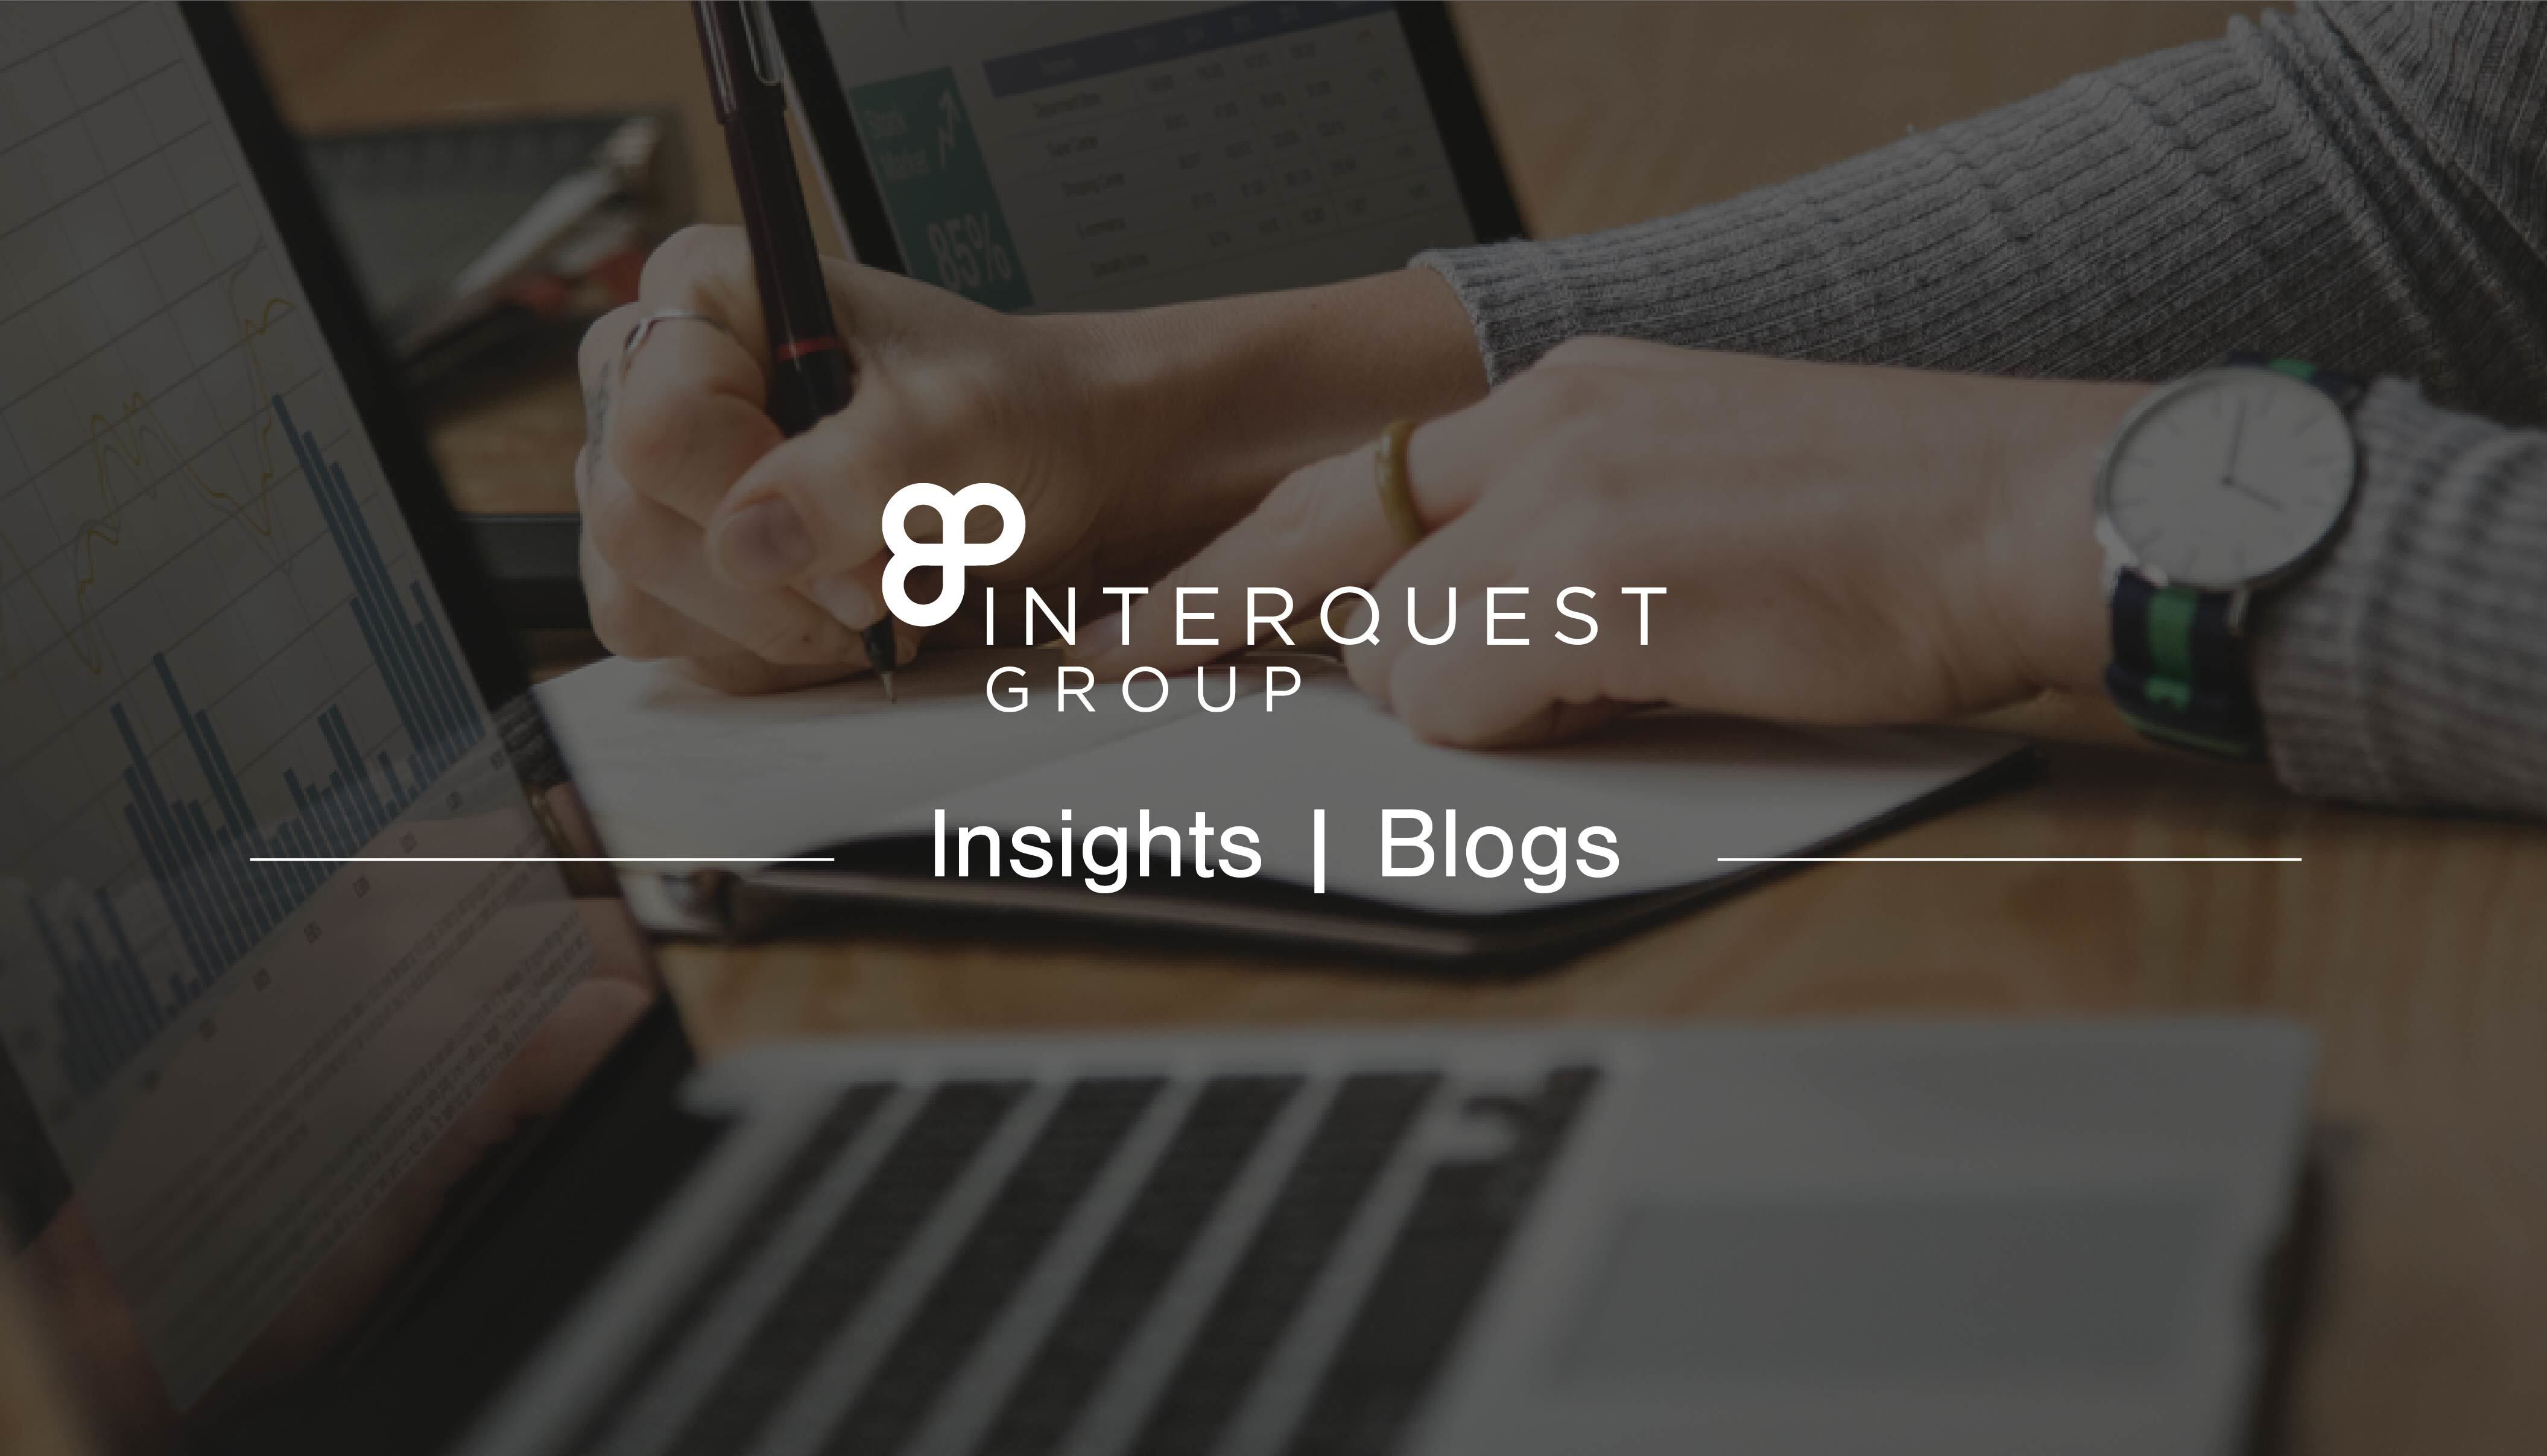 A insights banner image for a blog with the InterQuest Group logo on a image of a person writing notes from two screens